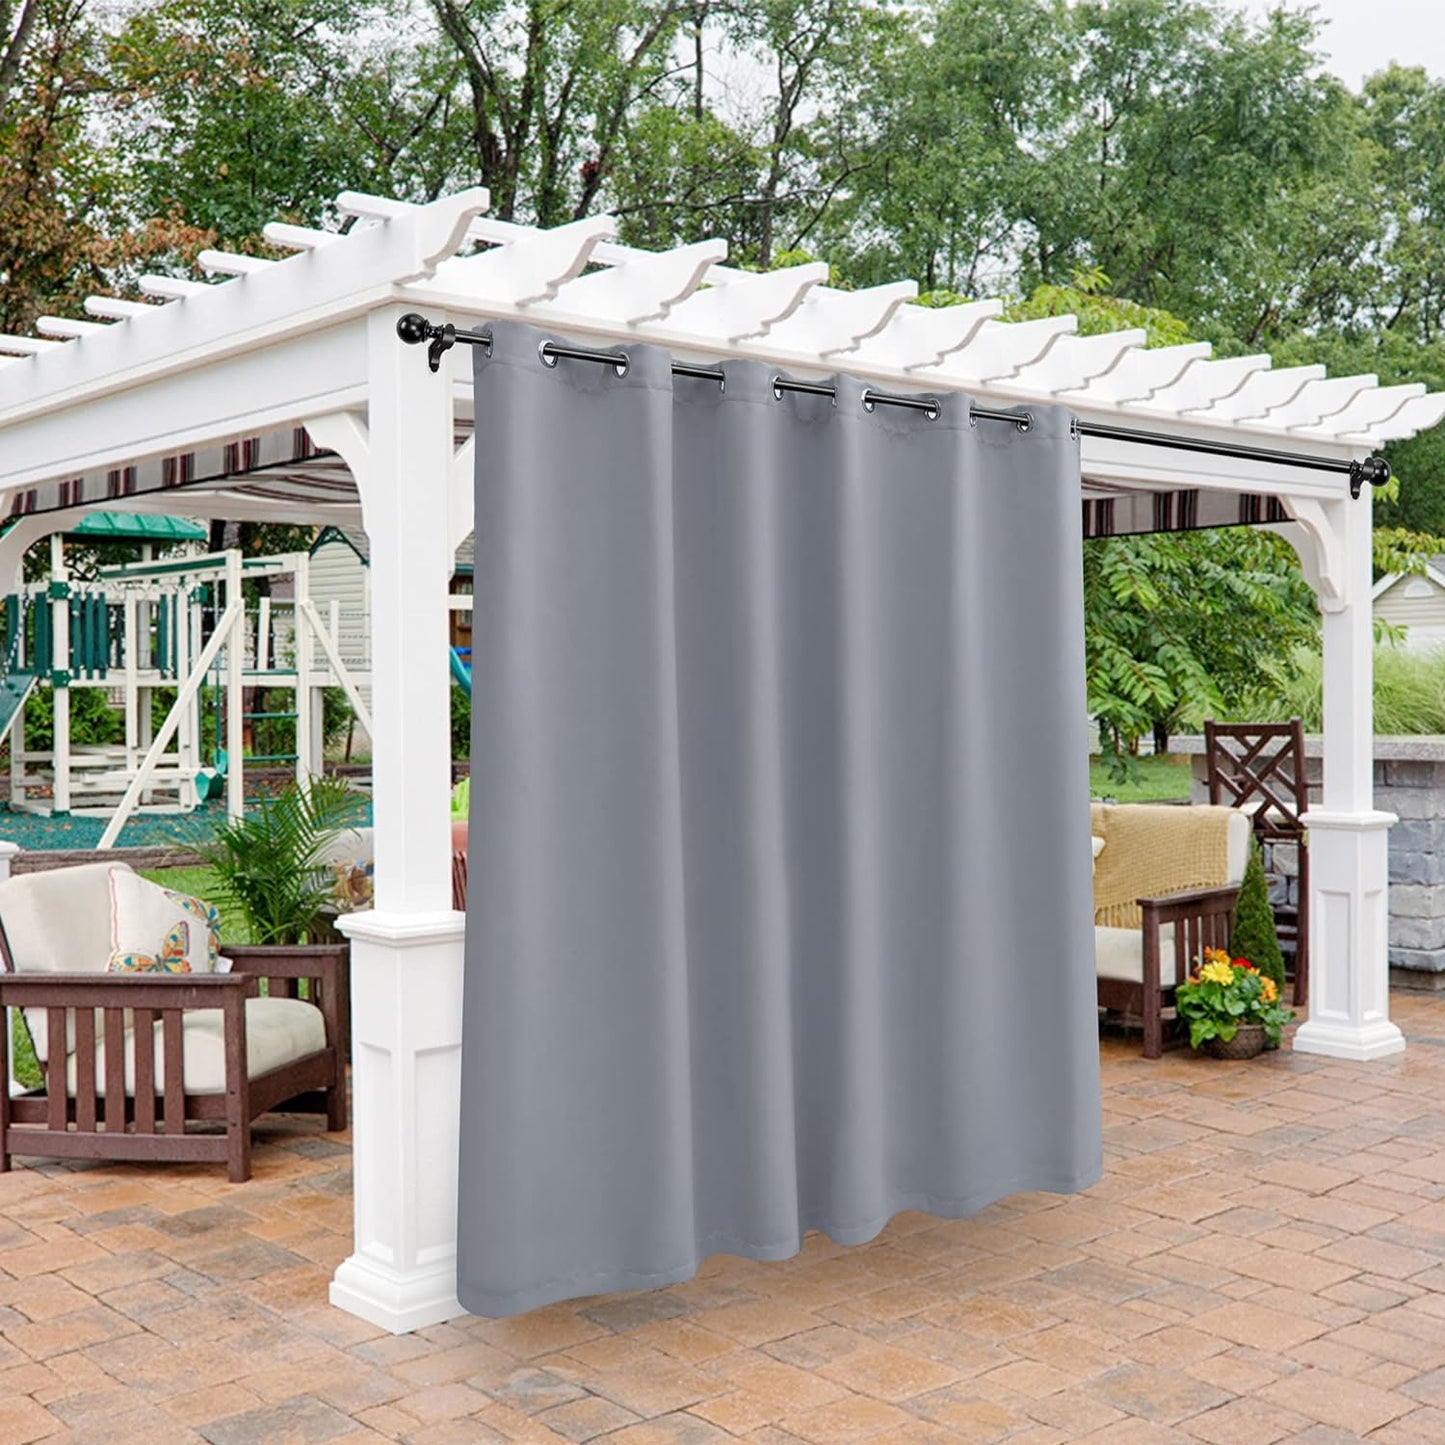 BONZER Outdoor Curtains for Patio Waterproof - Light Blocking Weather Resistant Privacy Grommet Blackout Curtains for Gazebo, Porch, Pergola, Cabana, Deck, Sunroom, 1 Panel, 52W X 84L Inch, Silver  BONZER Silver 100W X 108 Inch 